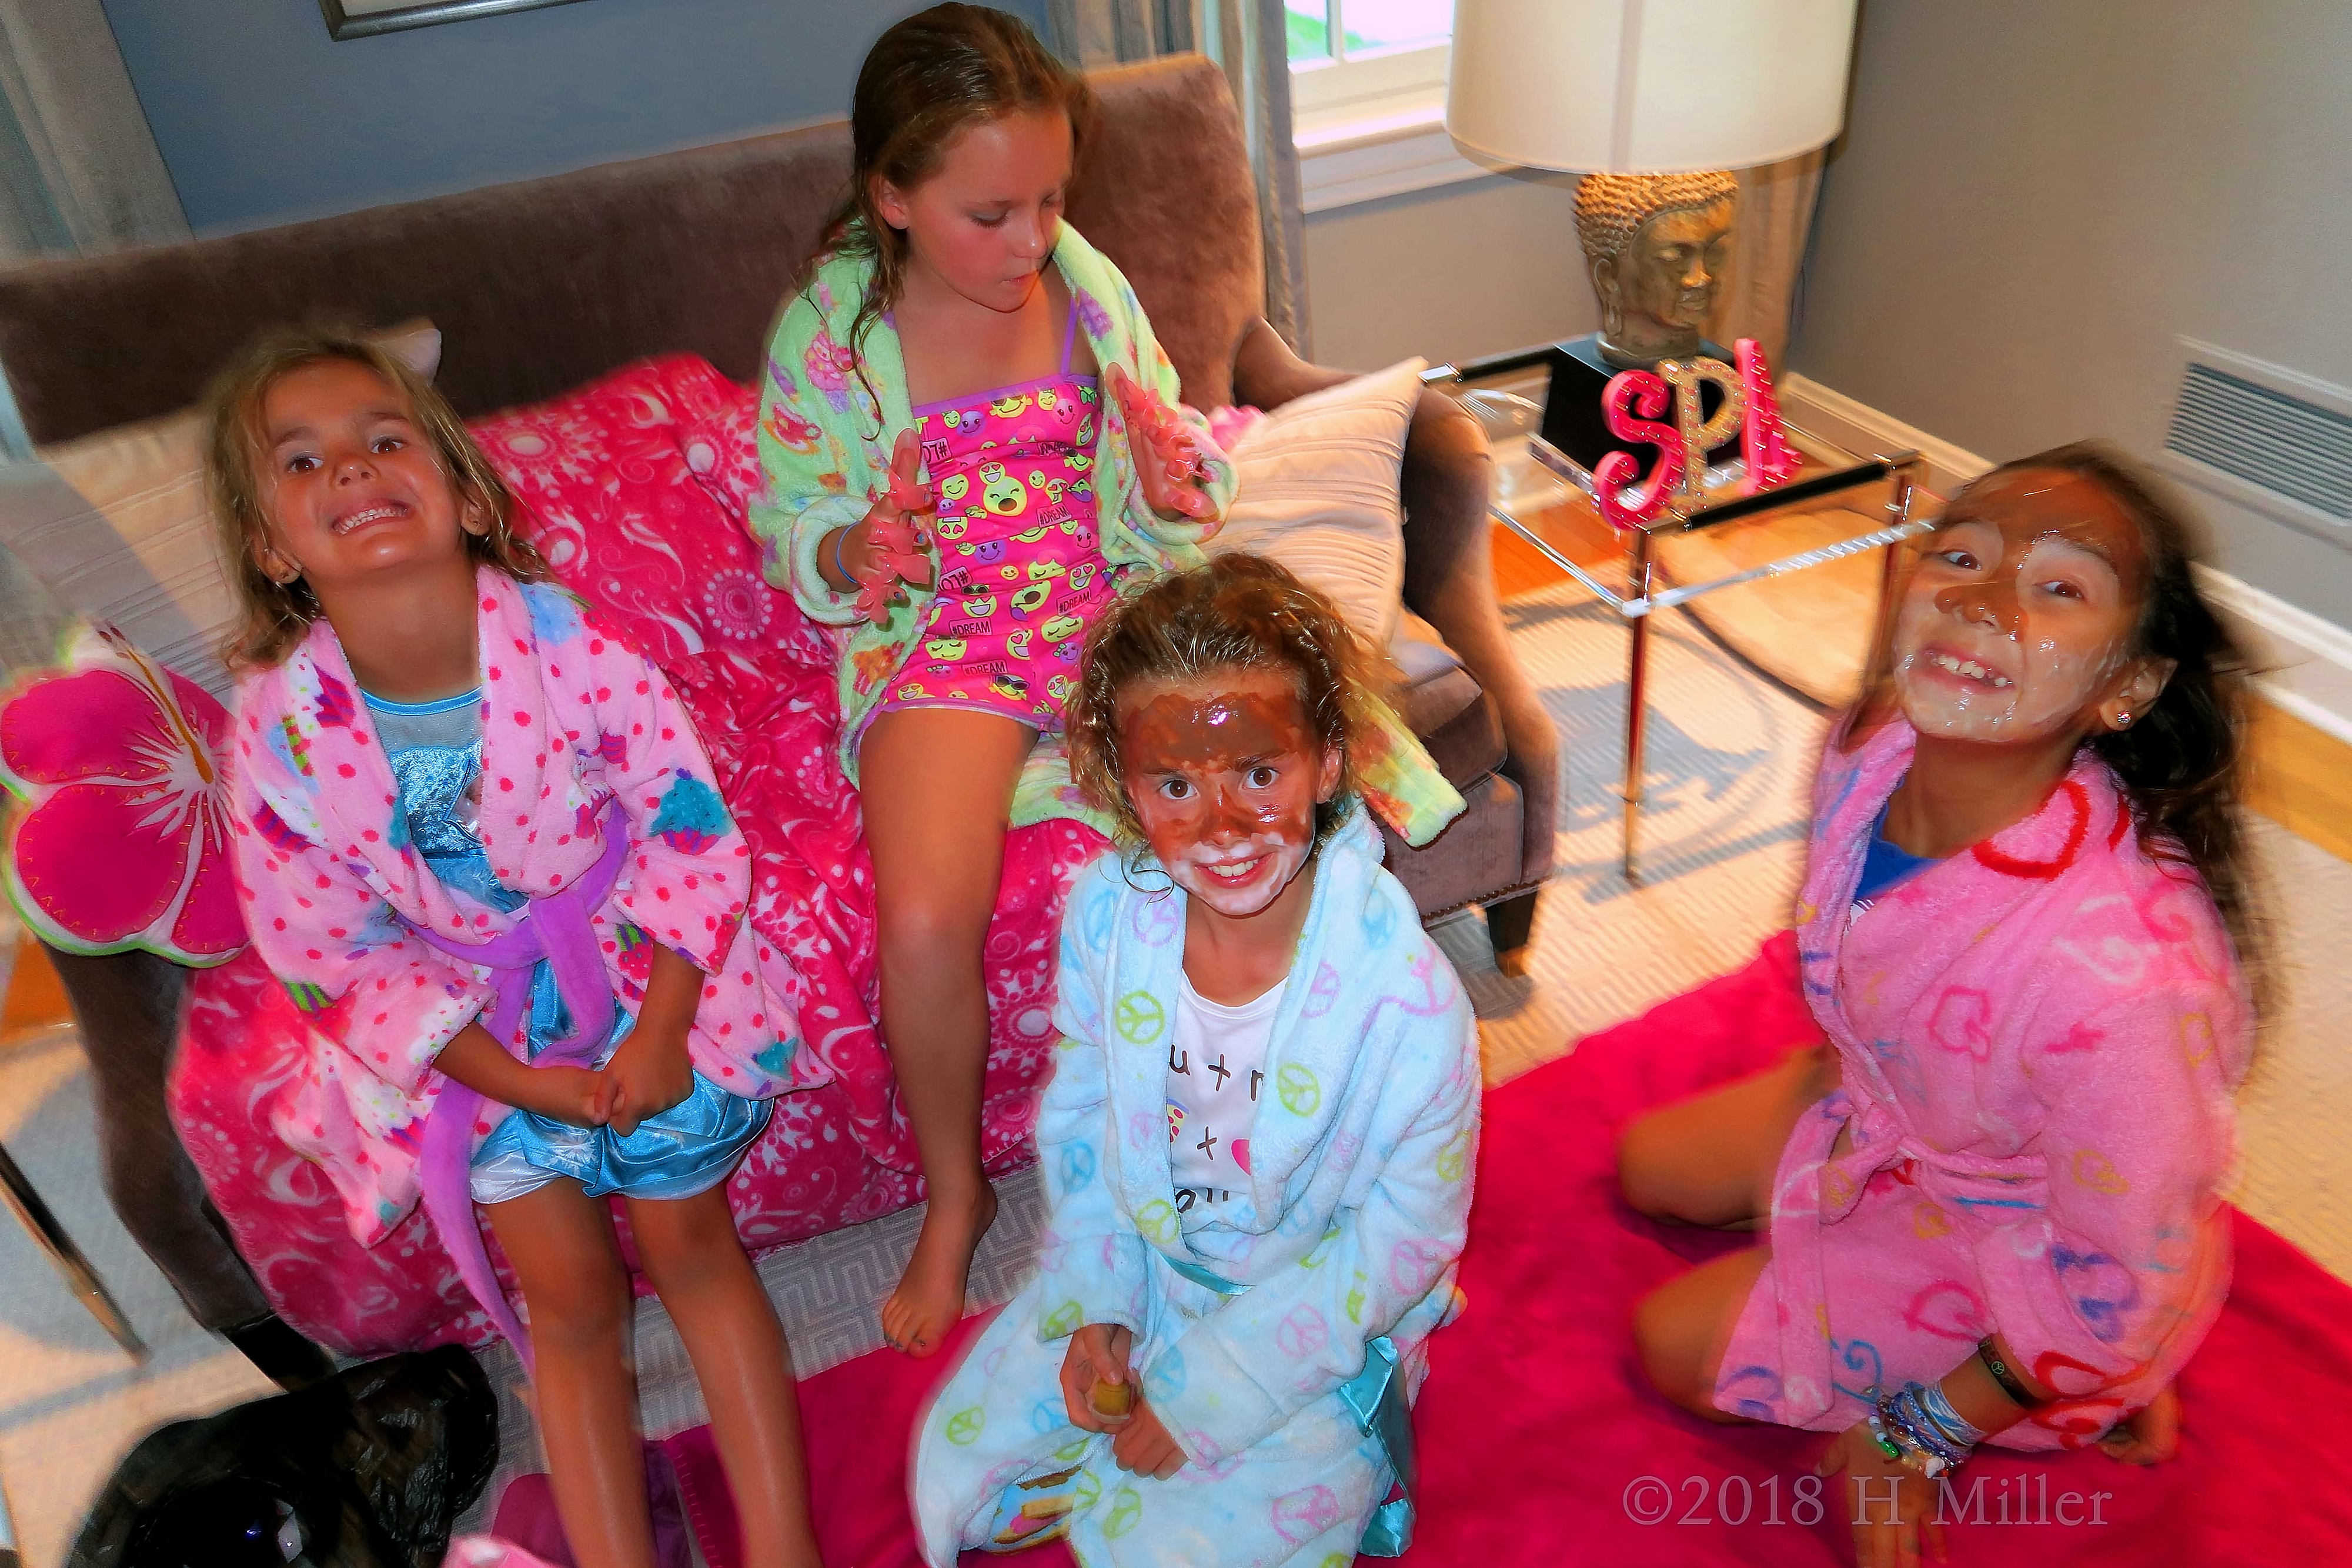 They Wait For The Kids Facial Masques To Dry Before Having Them Taken Off!